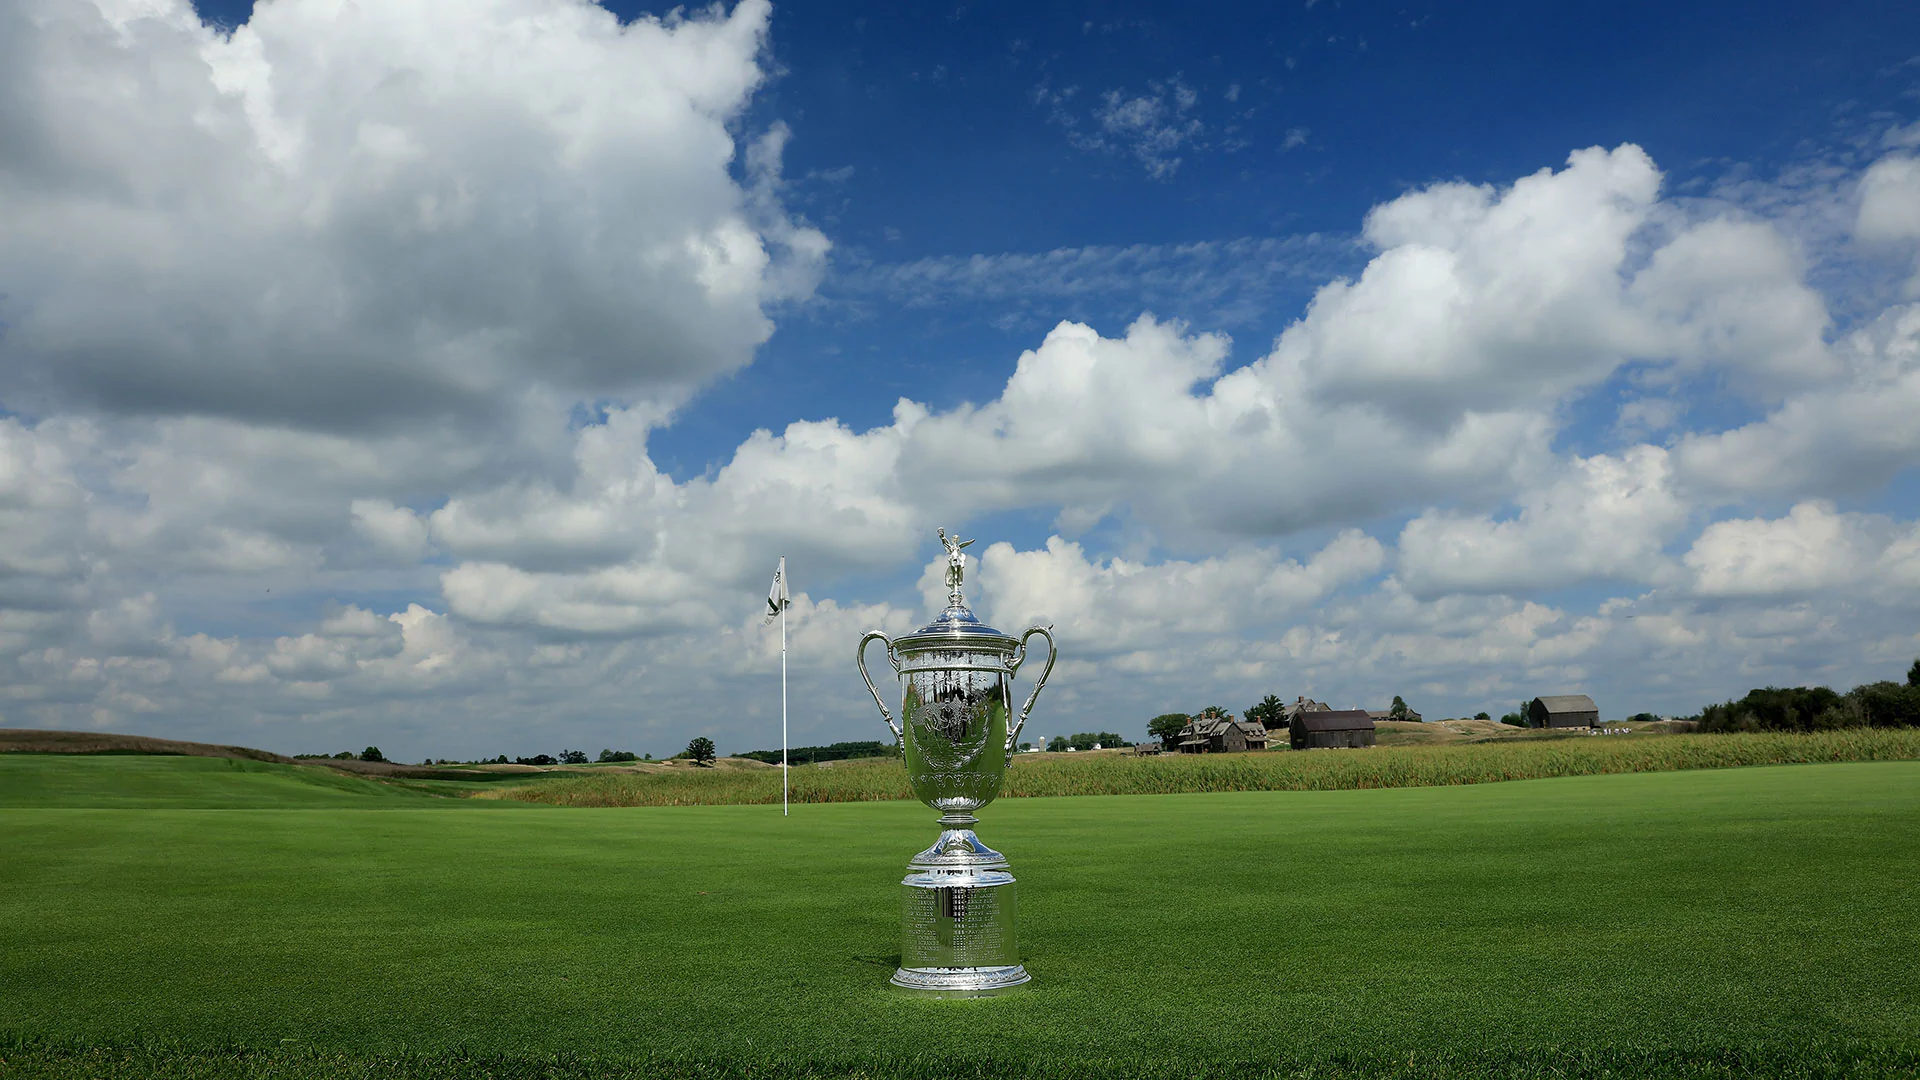 Podcast: Get ready for the 117th U.S. Open